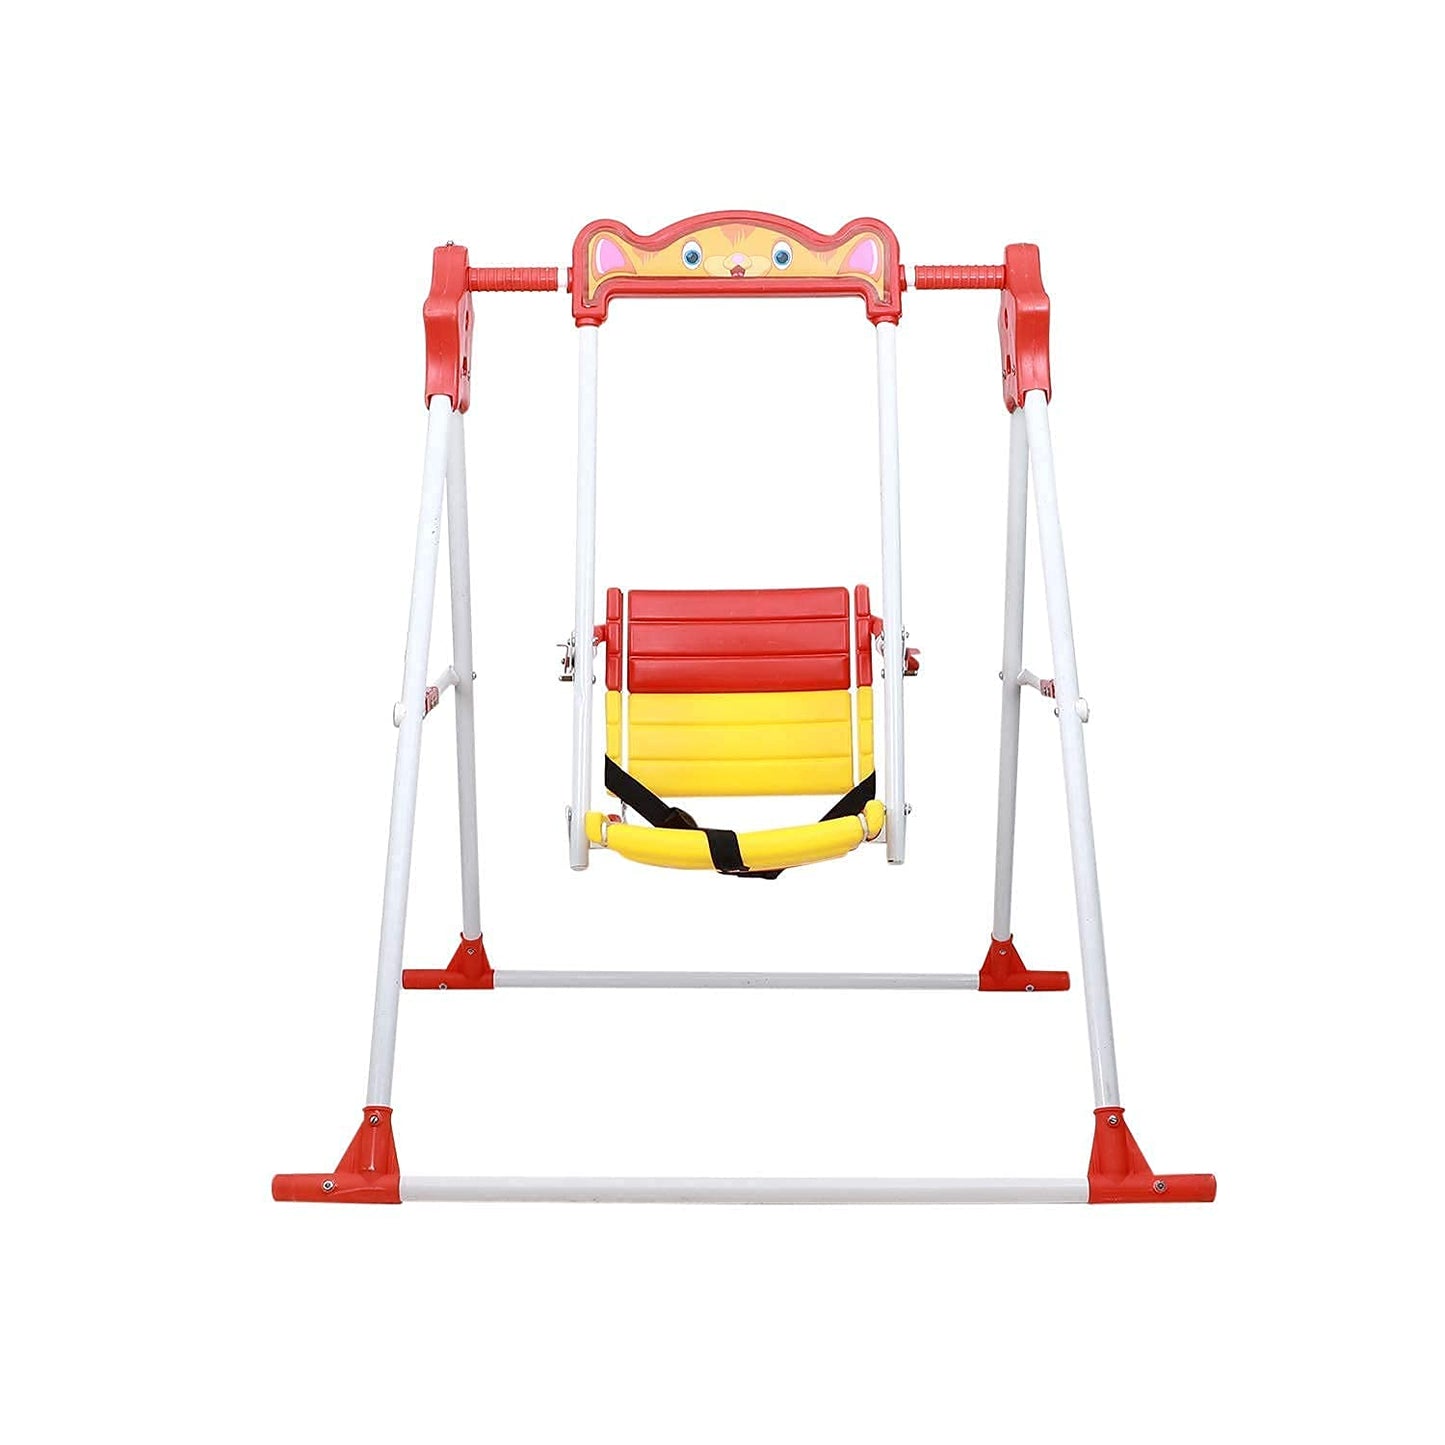 Bhasin Junior Swing with Alloy Stand - Foldable & Safe for Indoor, Garden & School Use - Ideal for Boys & Girls Aged 1-5 Years